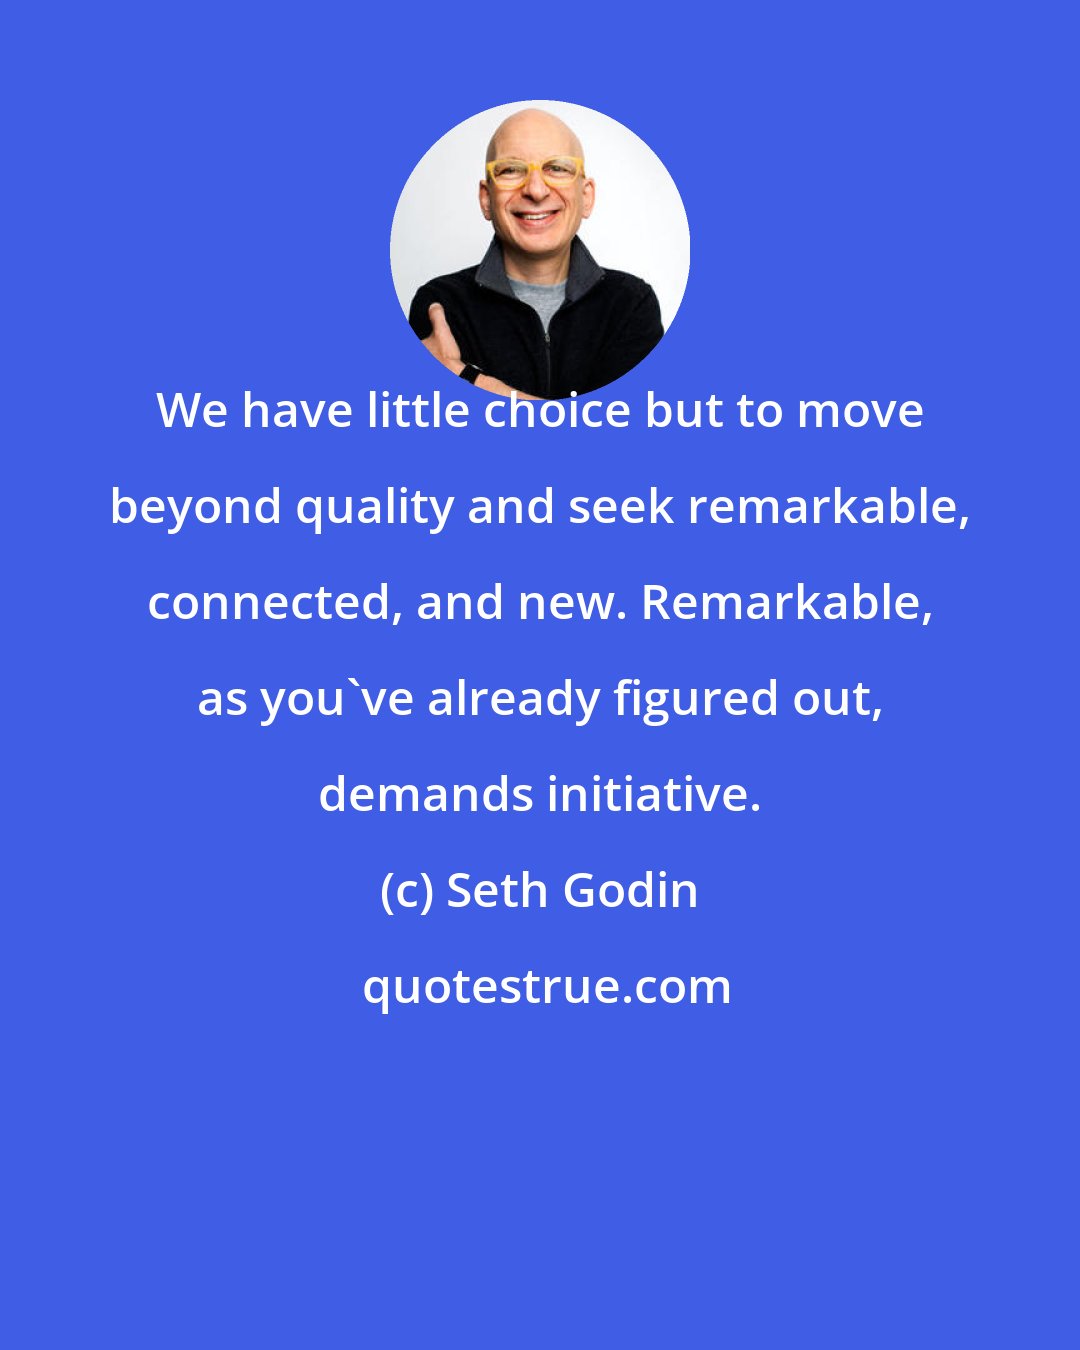 Seth Godin: We have little choice but to move beyond quality and seek remarkable, connected, and new. Remarkable, as you've already figured out, demands initiative.